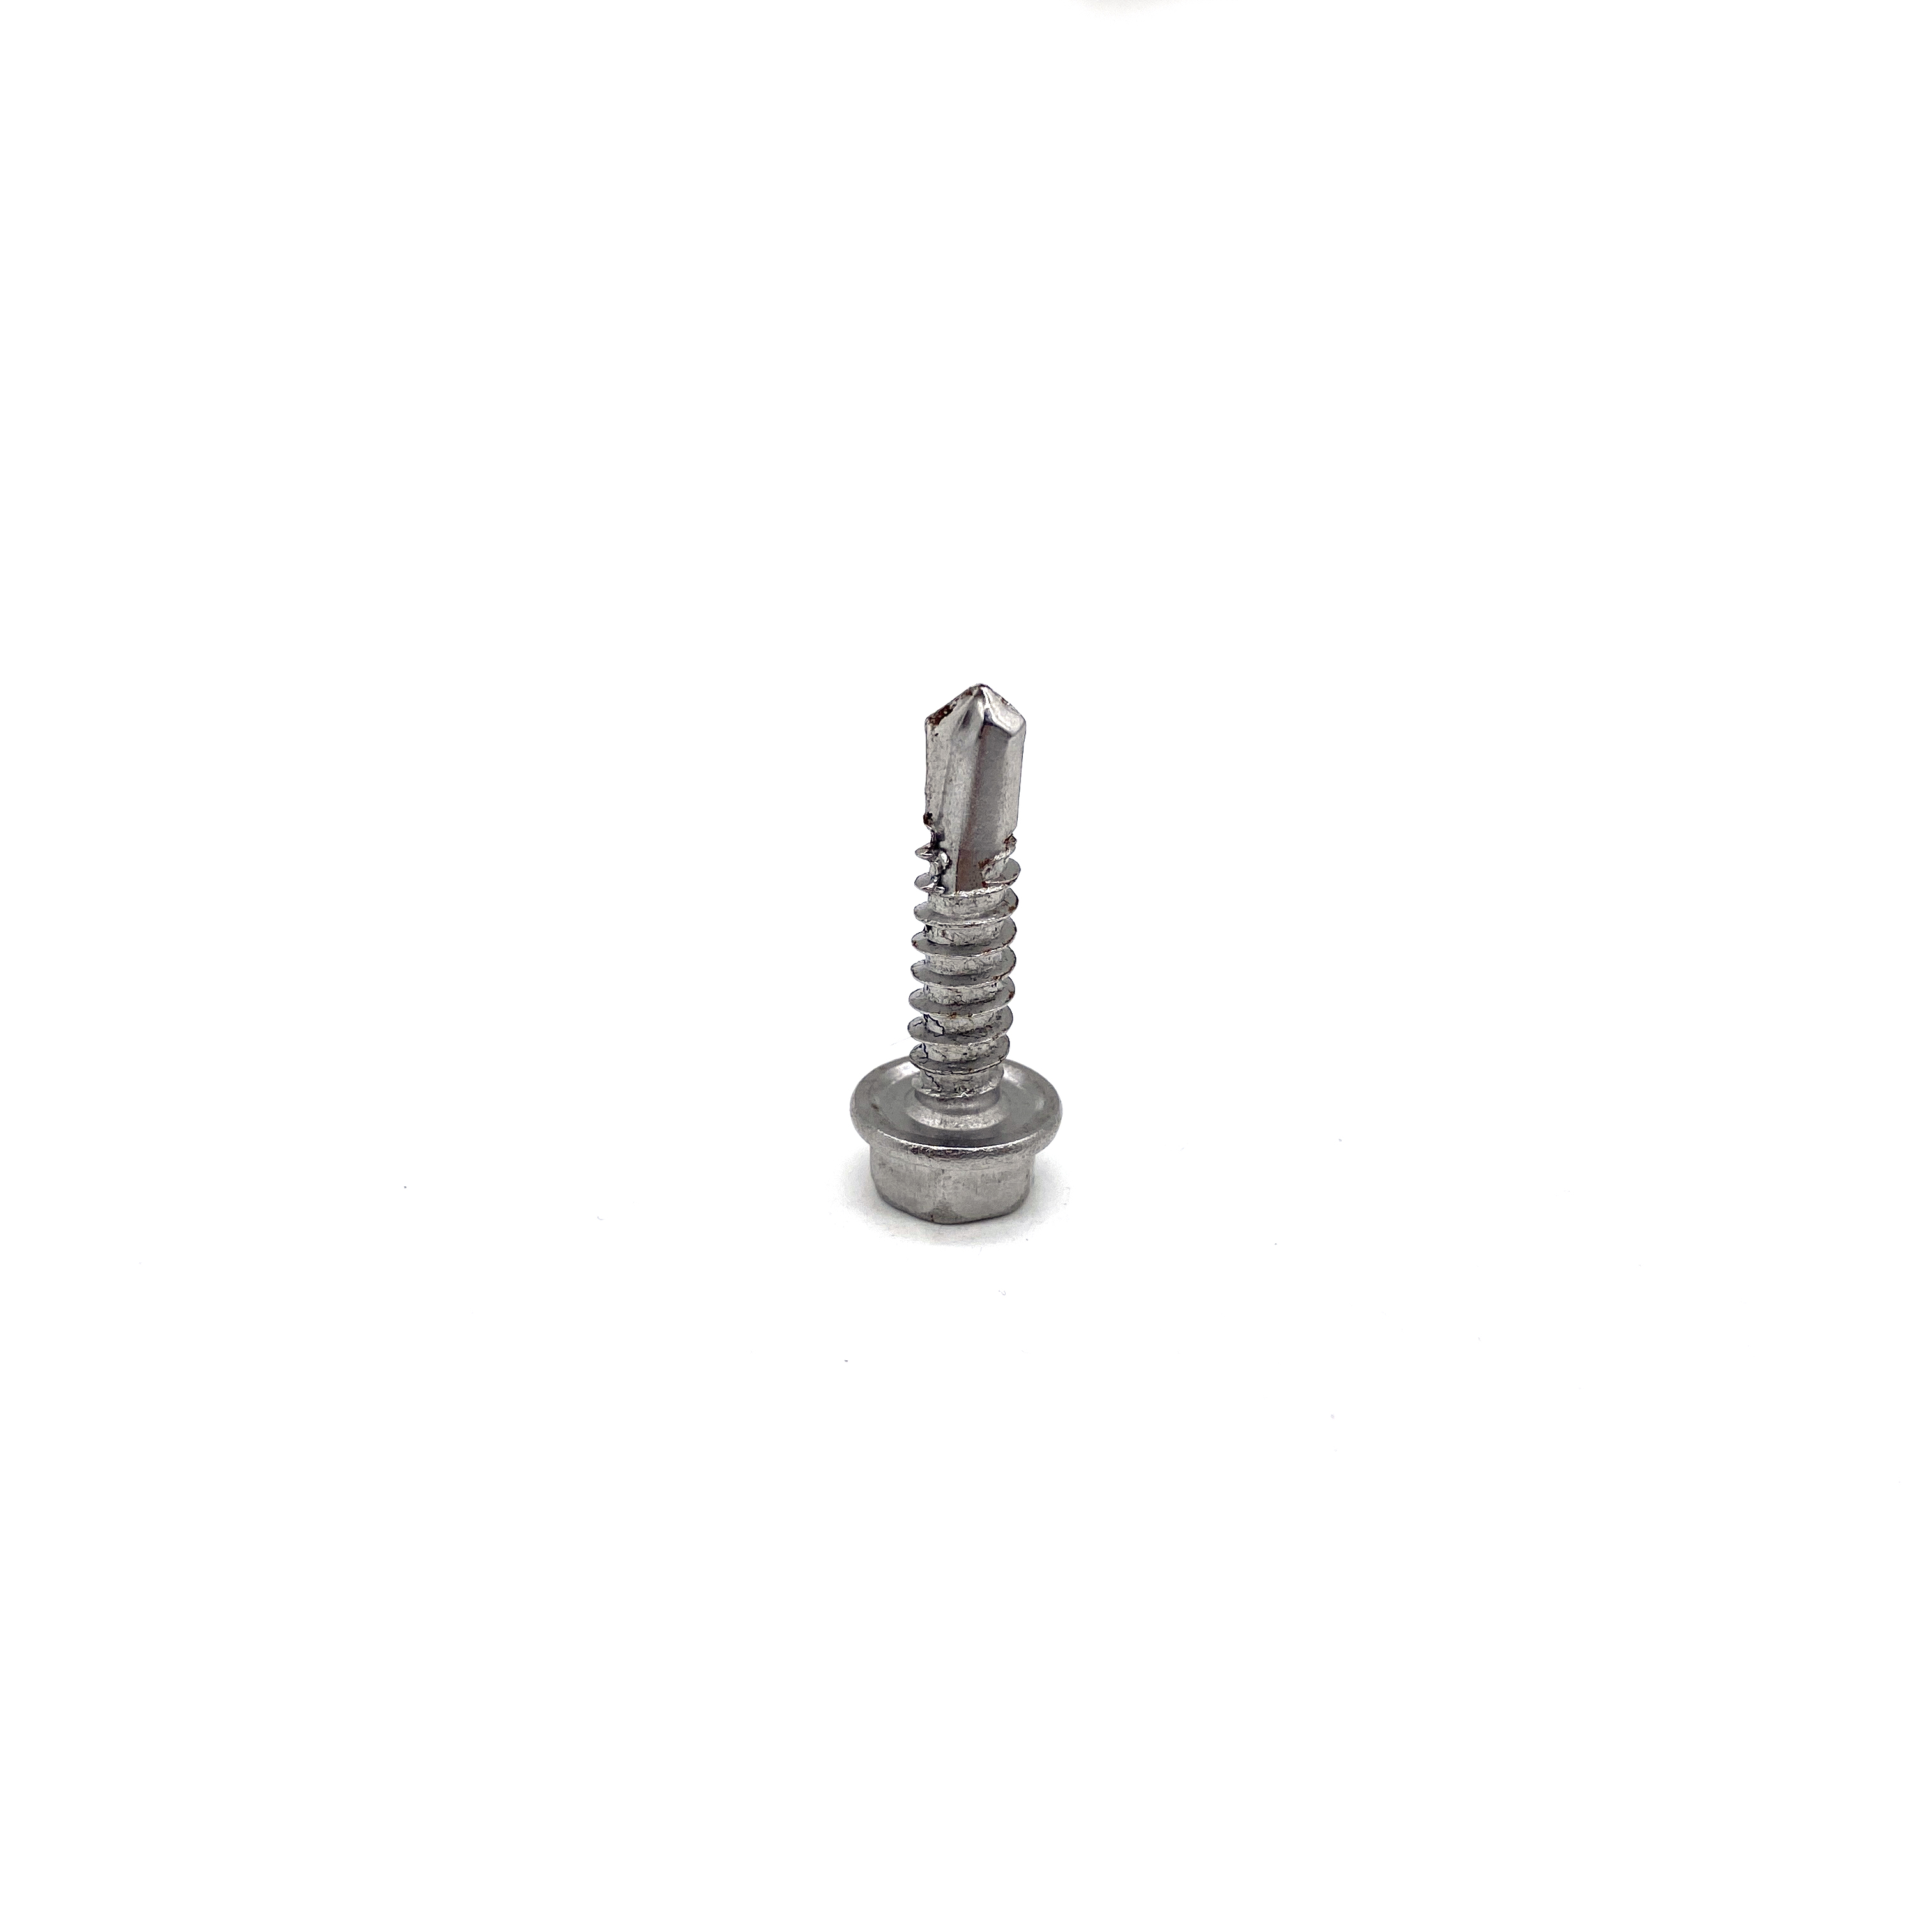  Factory Direct DIN7504K 40mm M6 Stainless Steel 304 316 Hex Flange Button Head Self Drilling Screw